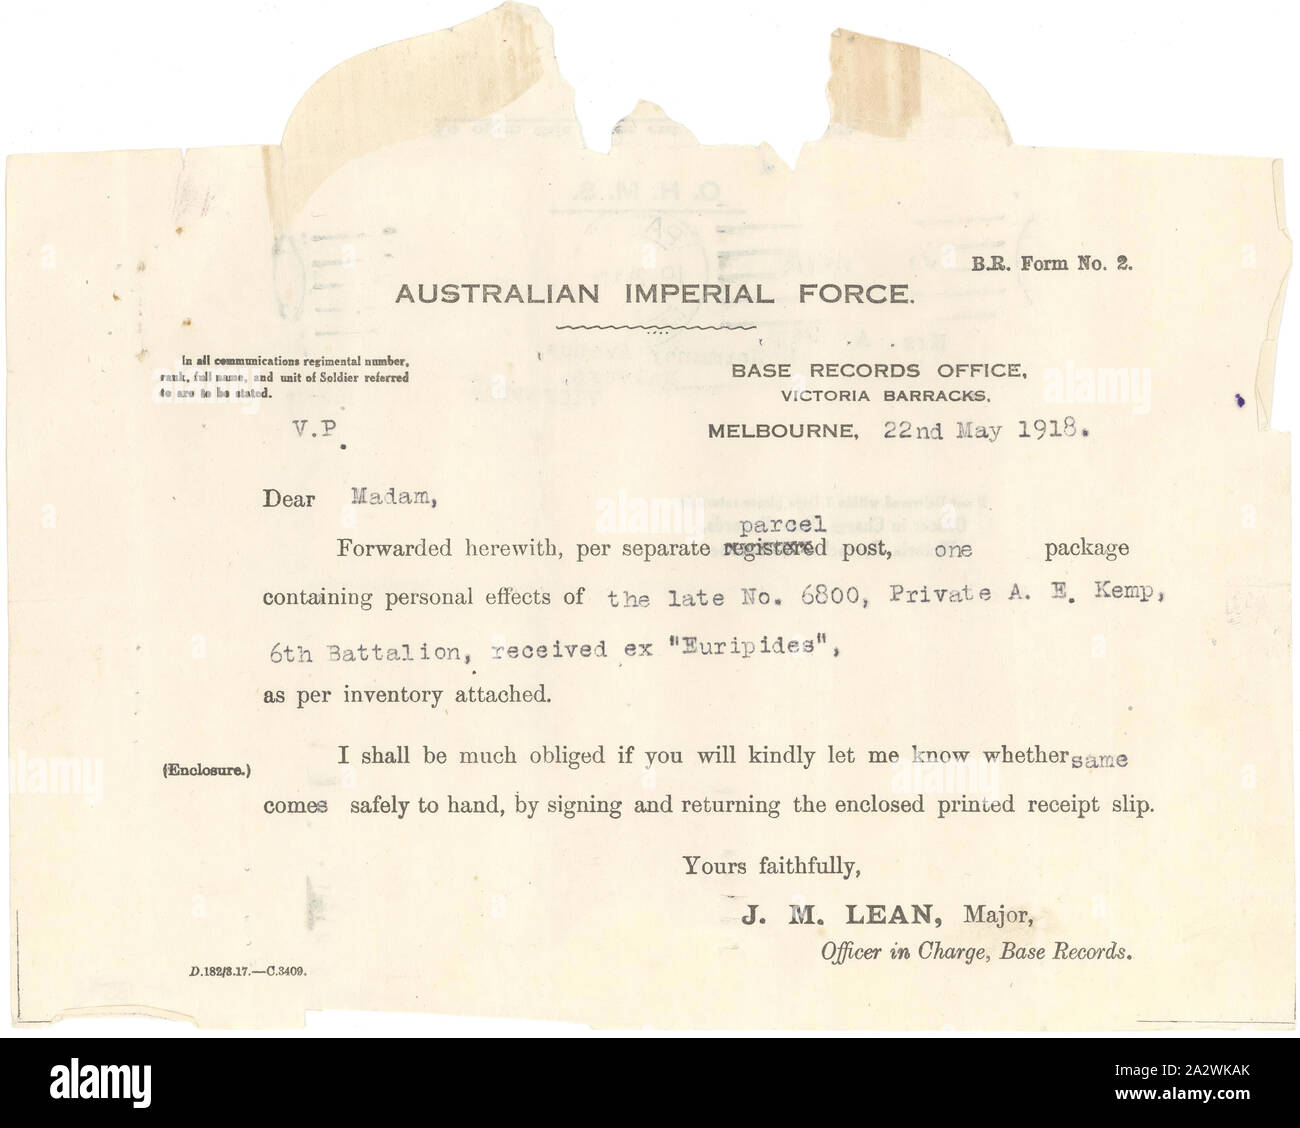 Letter - Australian Imperial Force to Annie Kemp, Personal Effects, 22 May 1918, Alternative Name(s): Lettergram. Aerogram Letter from the Australian Imperial Force In Melbourne to Mrs Annie Kemp relating to the return of personal effects from her husband, Private Albert Kemp, a World War I soldier killed in action on 21 September 1917. The letter explains that she is receiving the a parcel of personal effects from her late husband Private A. E. Kemp, who was killed in Stock Photo